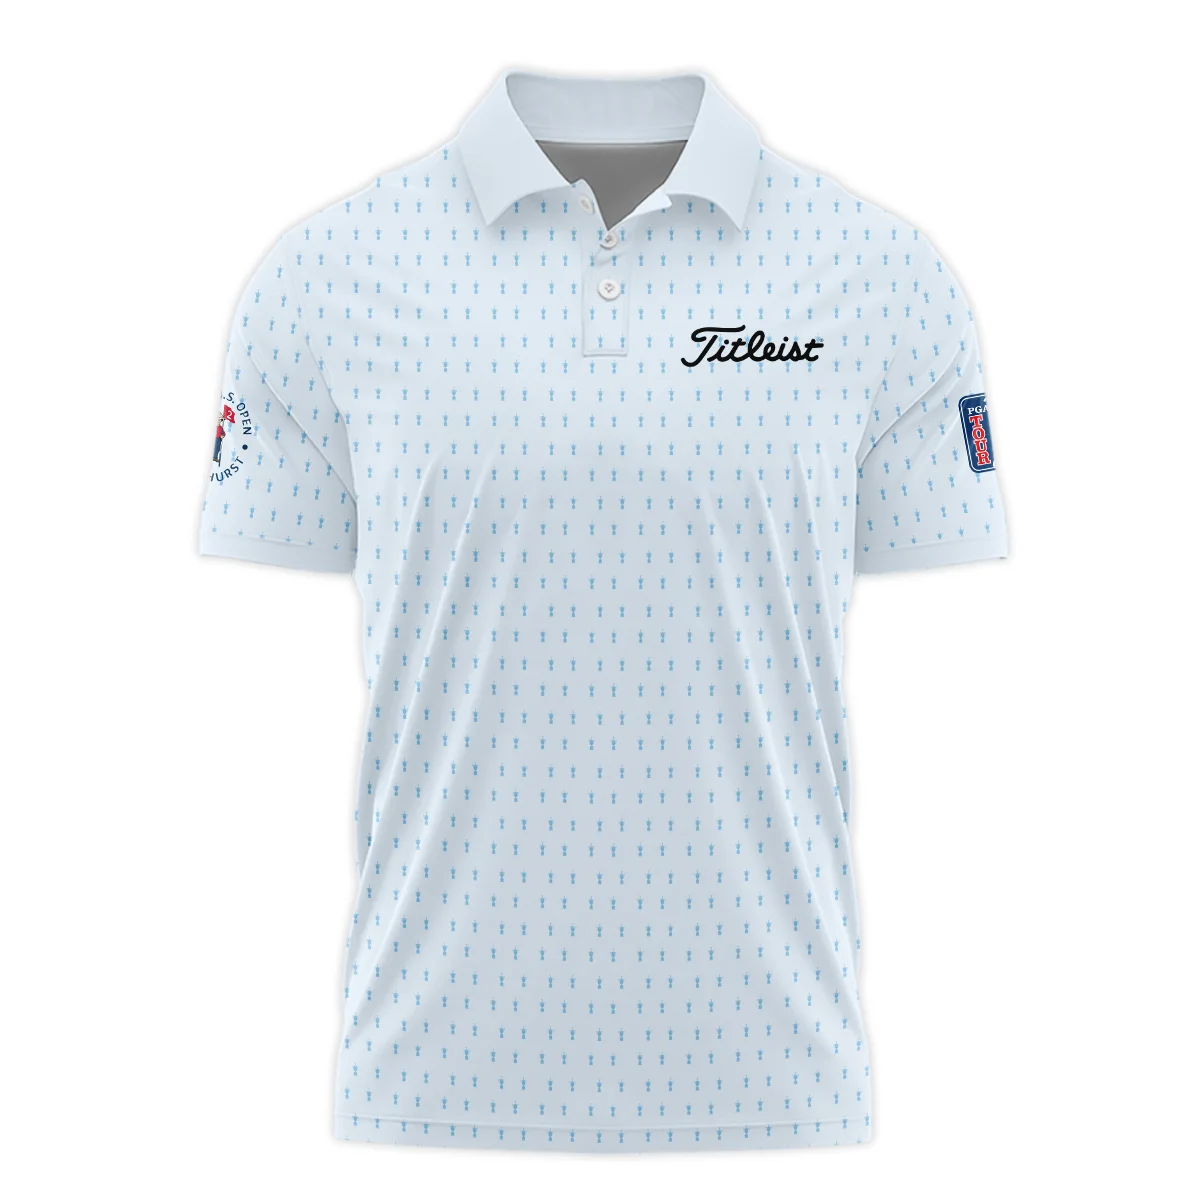 124th U.S. Open Pinehurst Titleist Polo Shirt Sports Pattern Cup Color Light Blue All Over Print Polo Shirt For Men